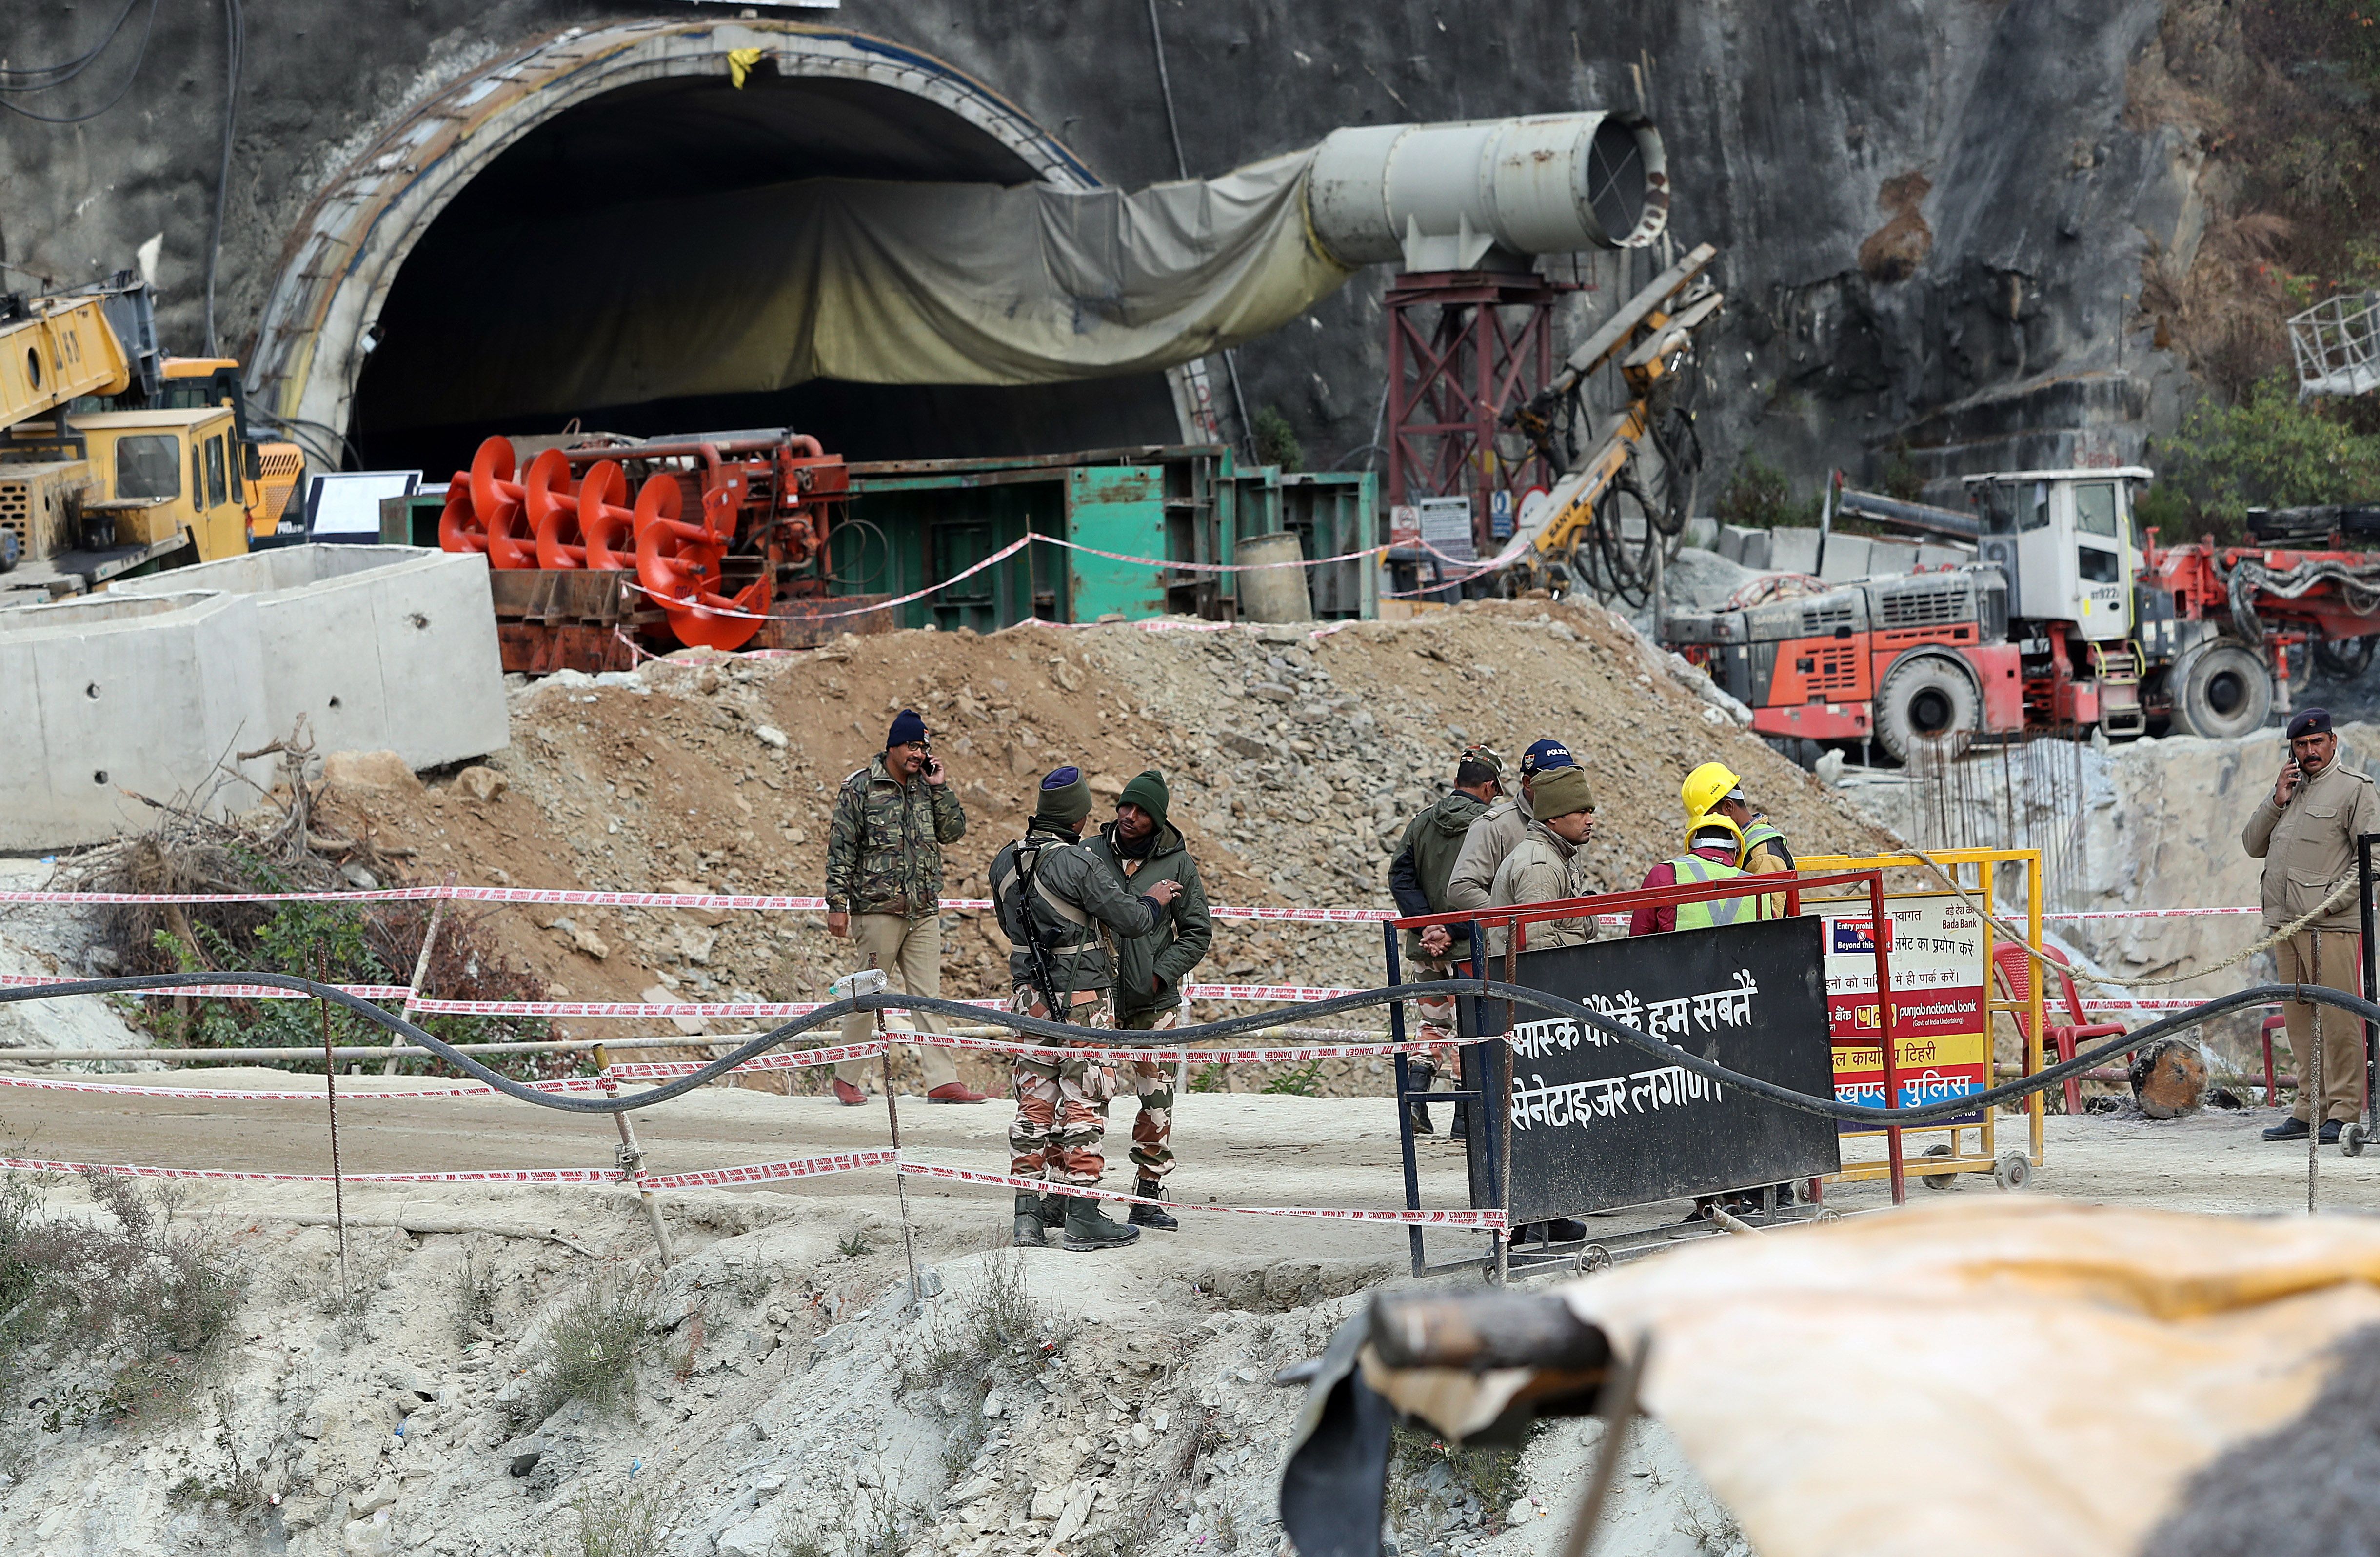 (ID_13382449) INDIA TUNNEL COLLAPSE